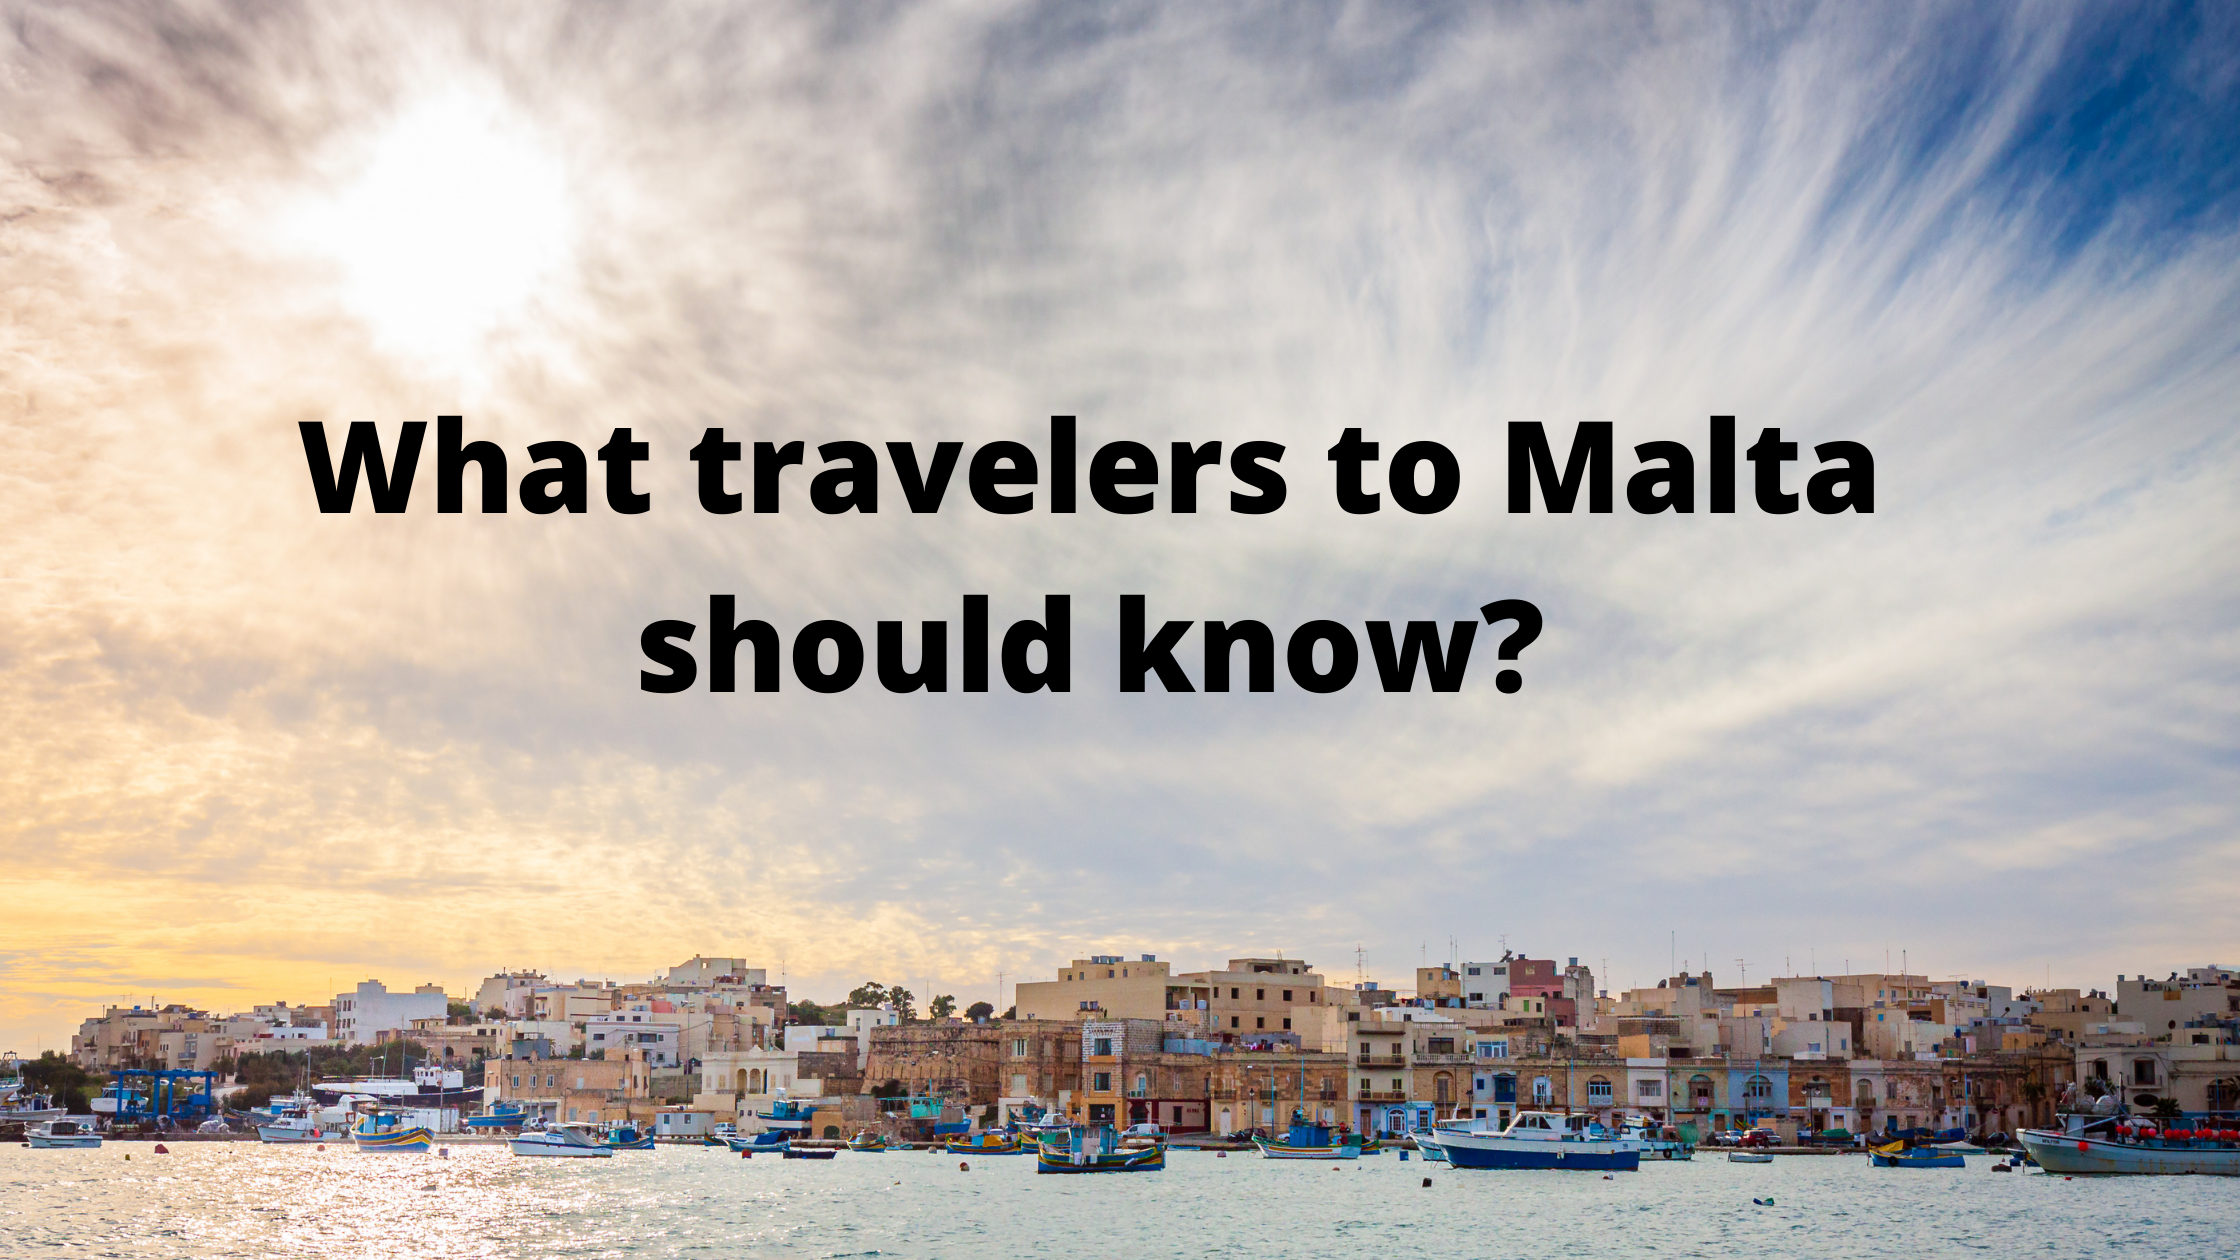 What travelers to Malta should know?